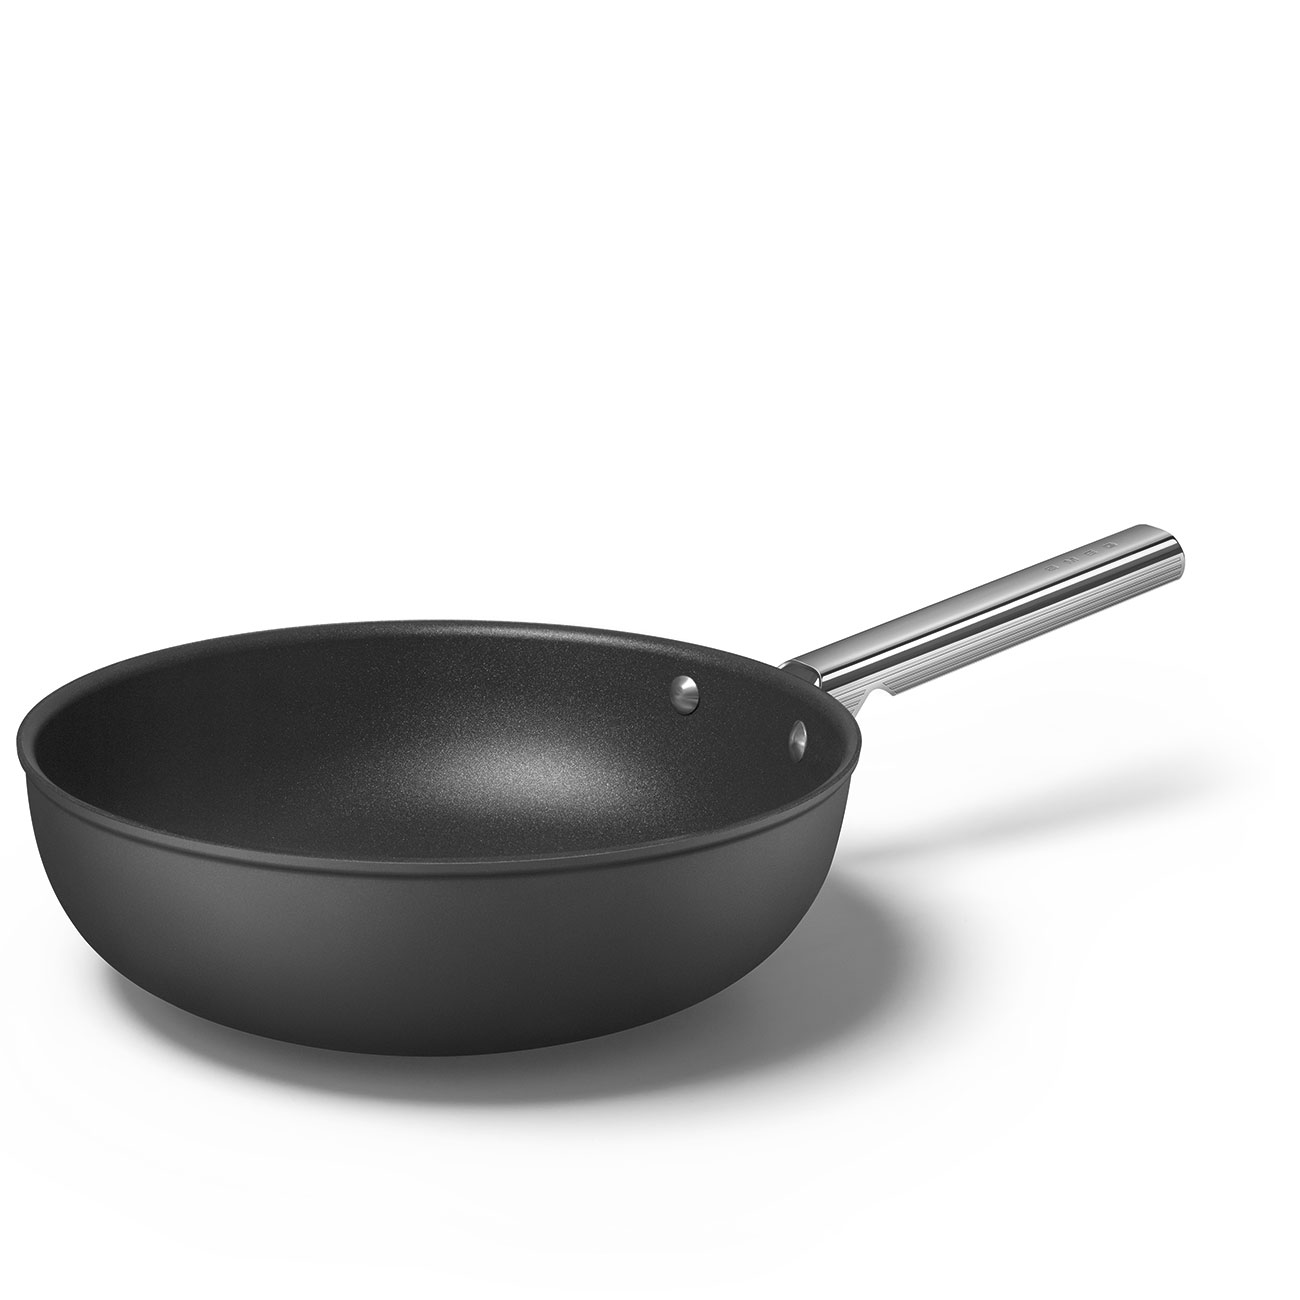 Smeg Black Non-stick Wok with Stainless Steel Handle - CKFW3001BLM_7